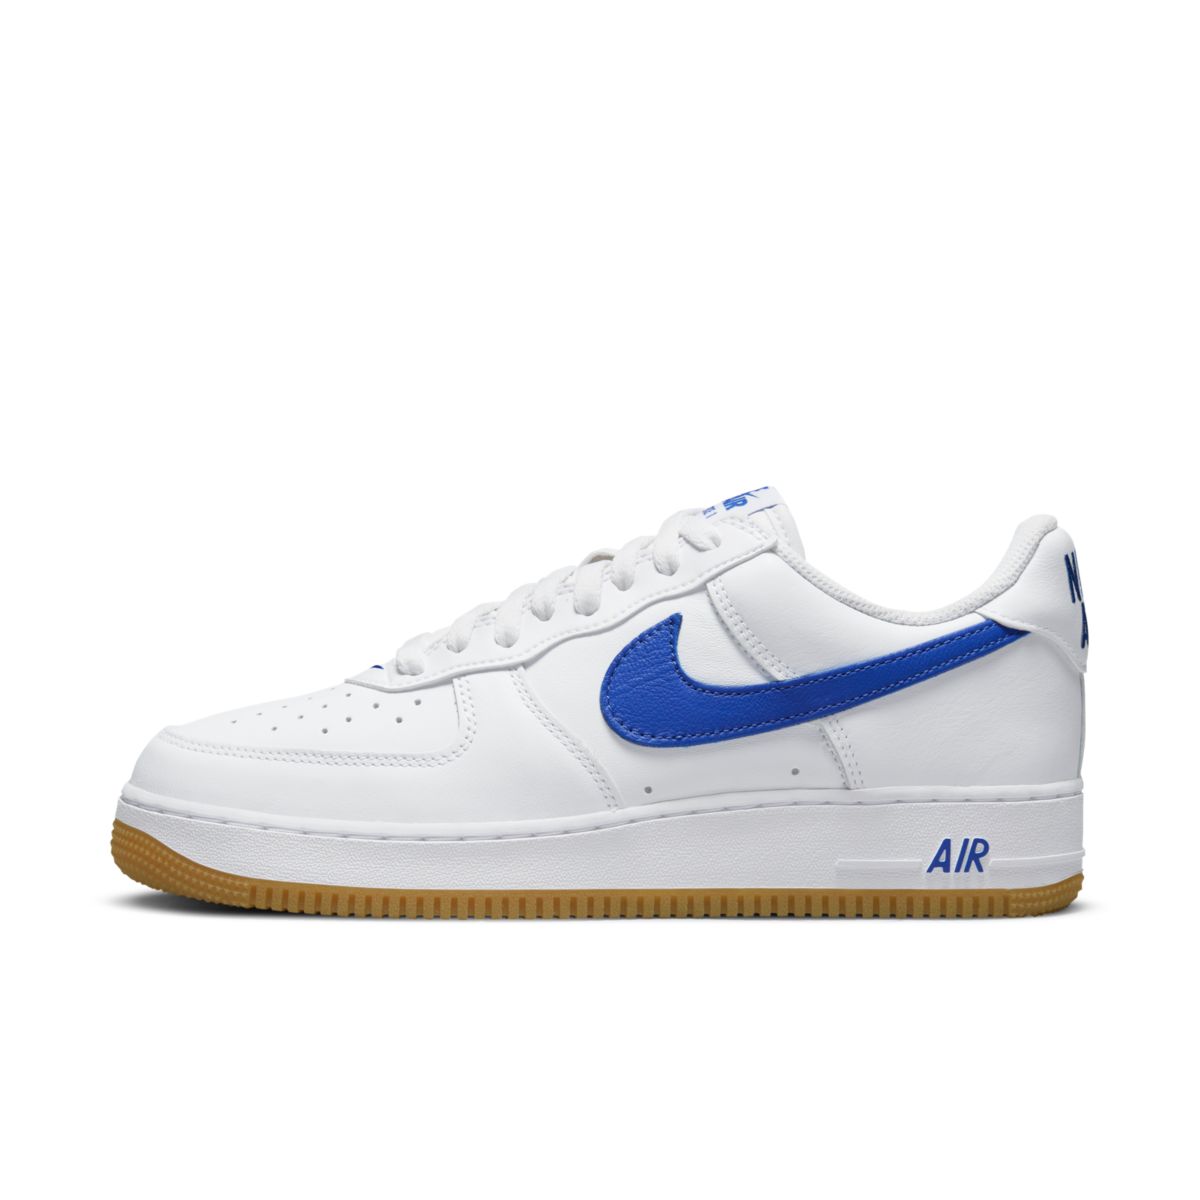 Nike Air Force 1 Low Since 82 DJ3911-101 2